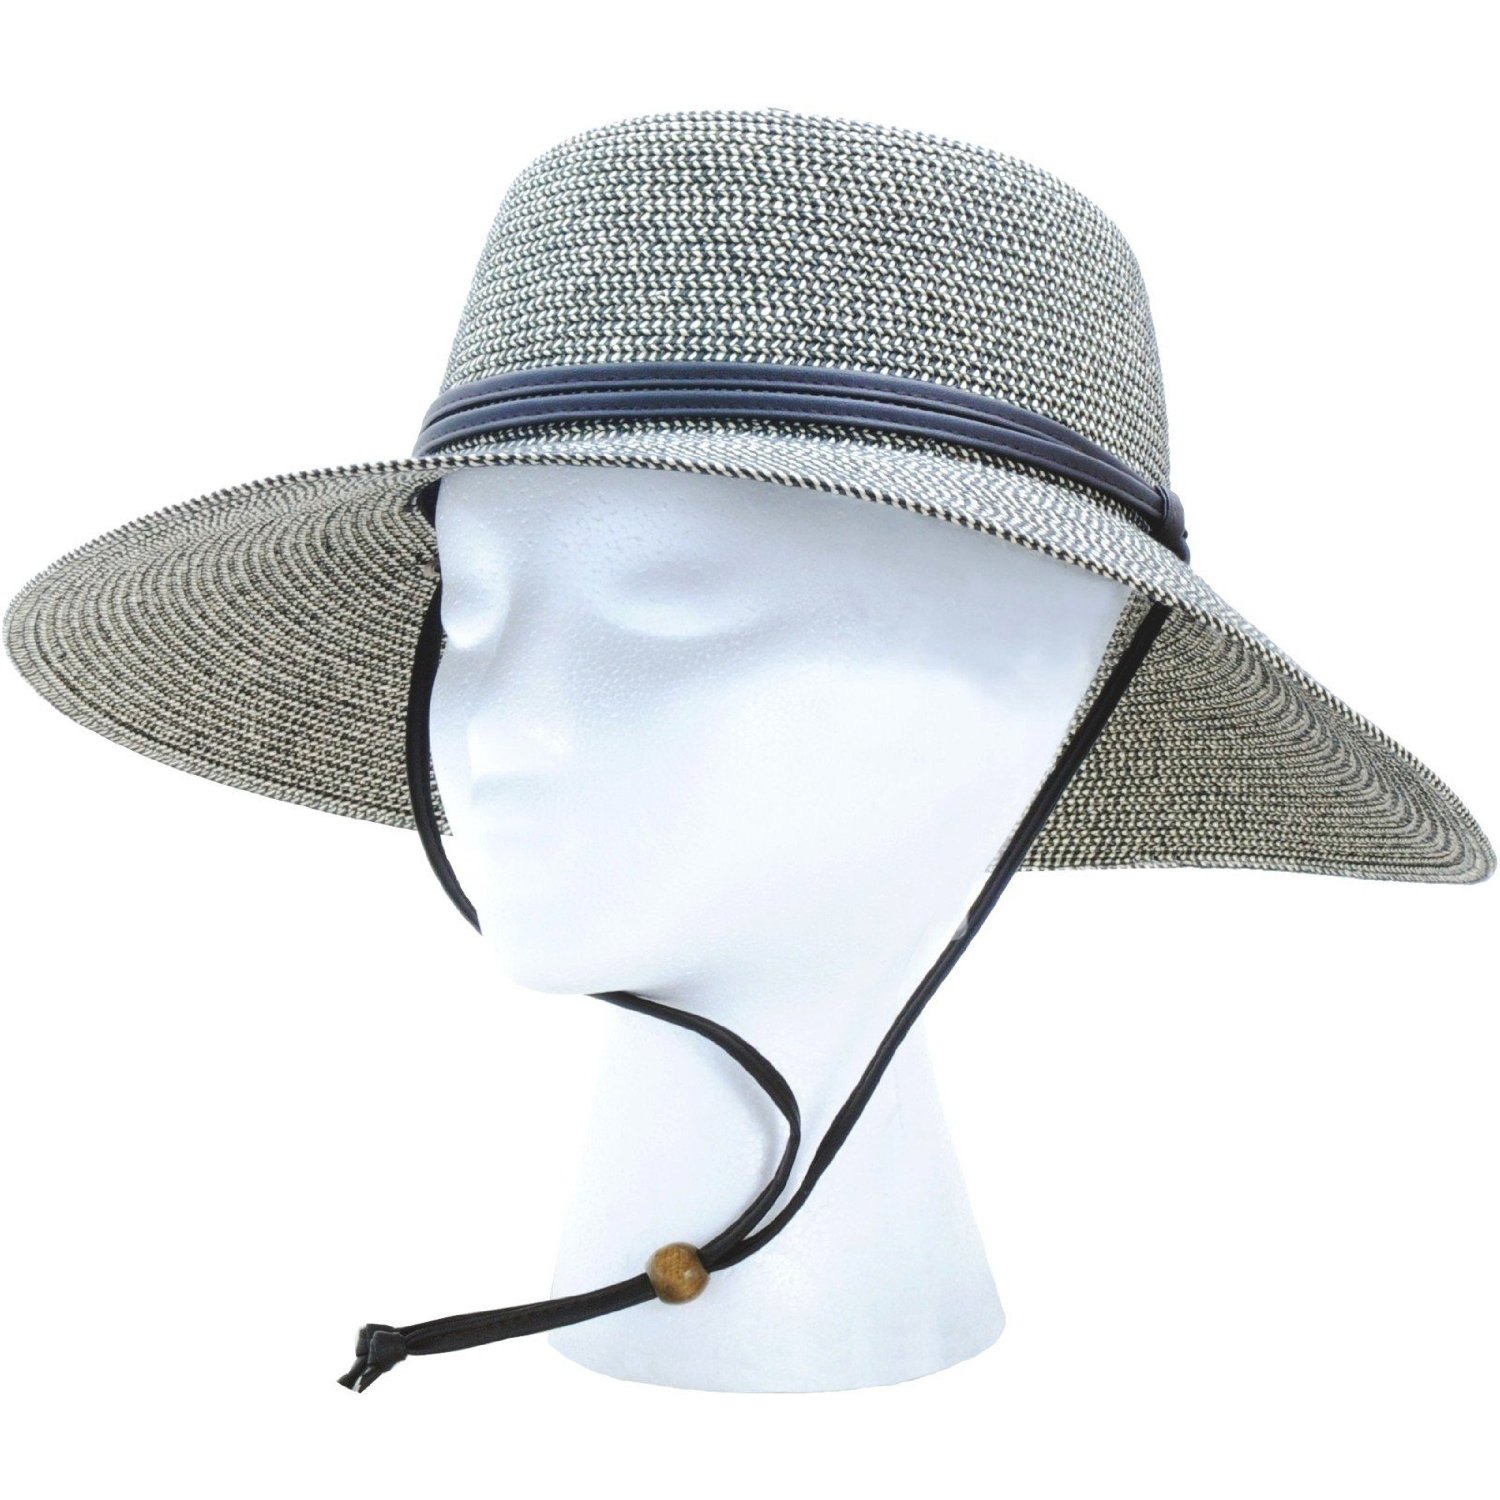 Sloggers Women's Wide Brim Braided Sun Hat with Wind Lanyard Rated UPF 50+